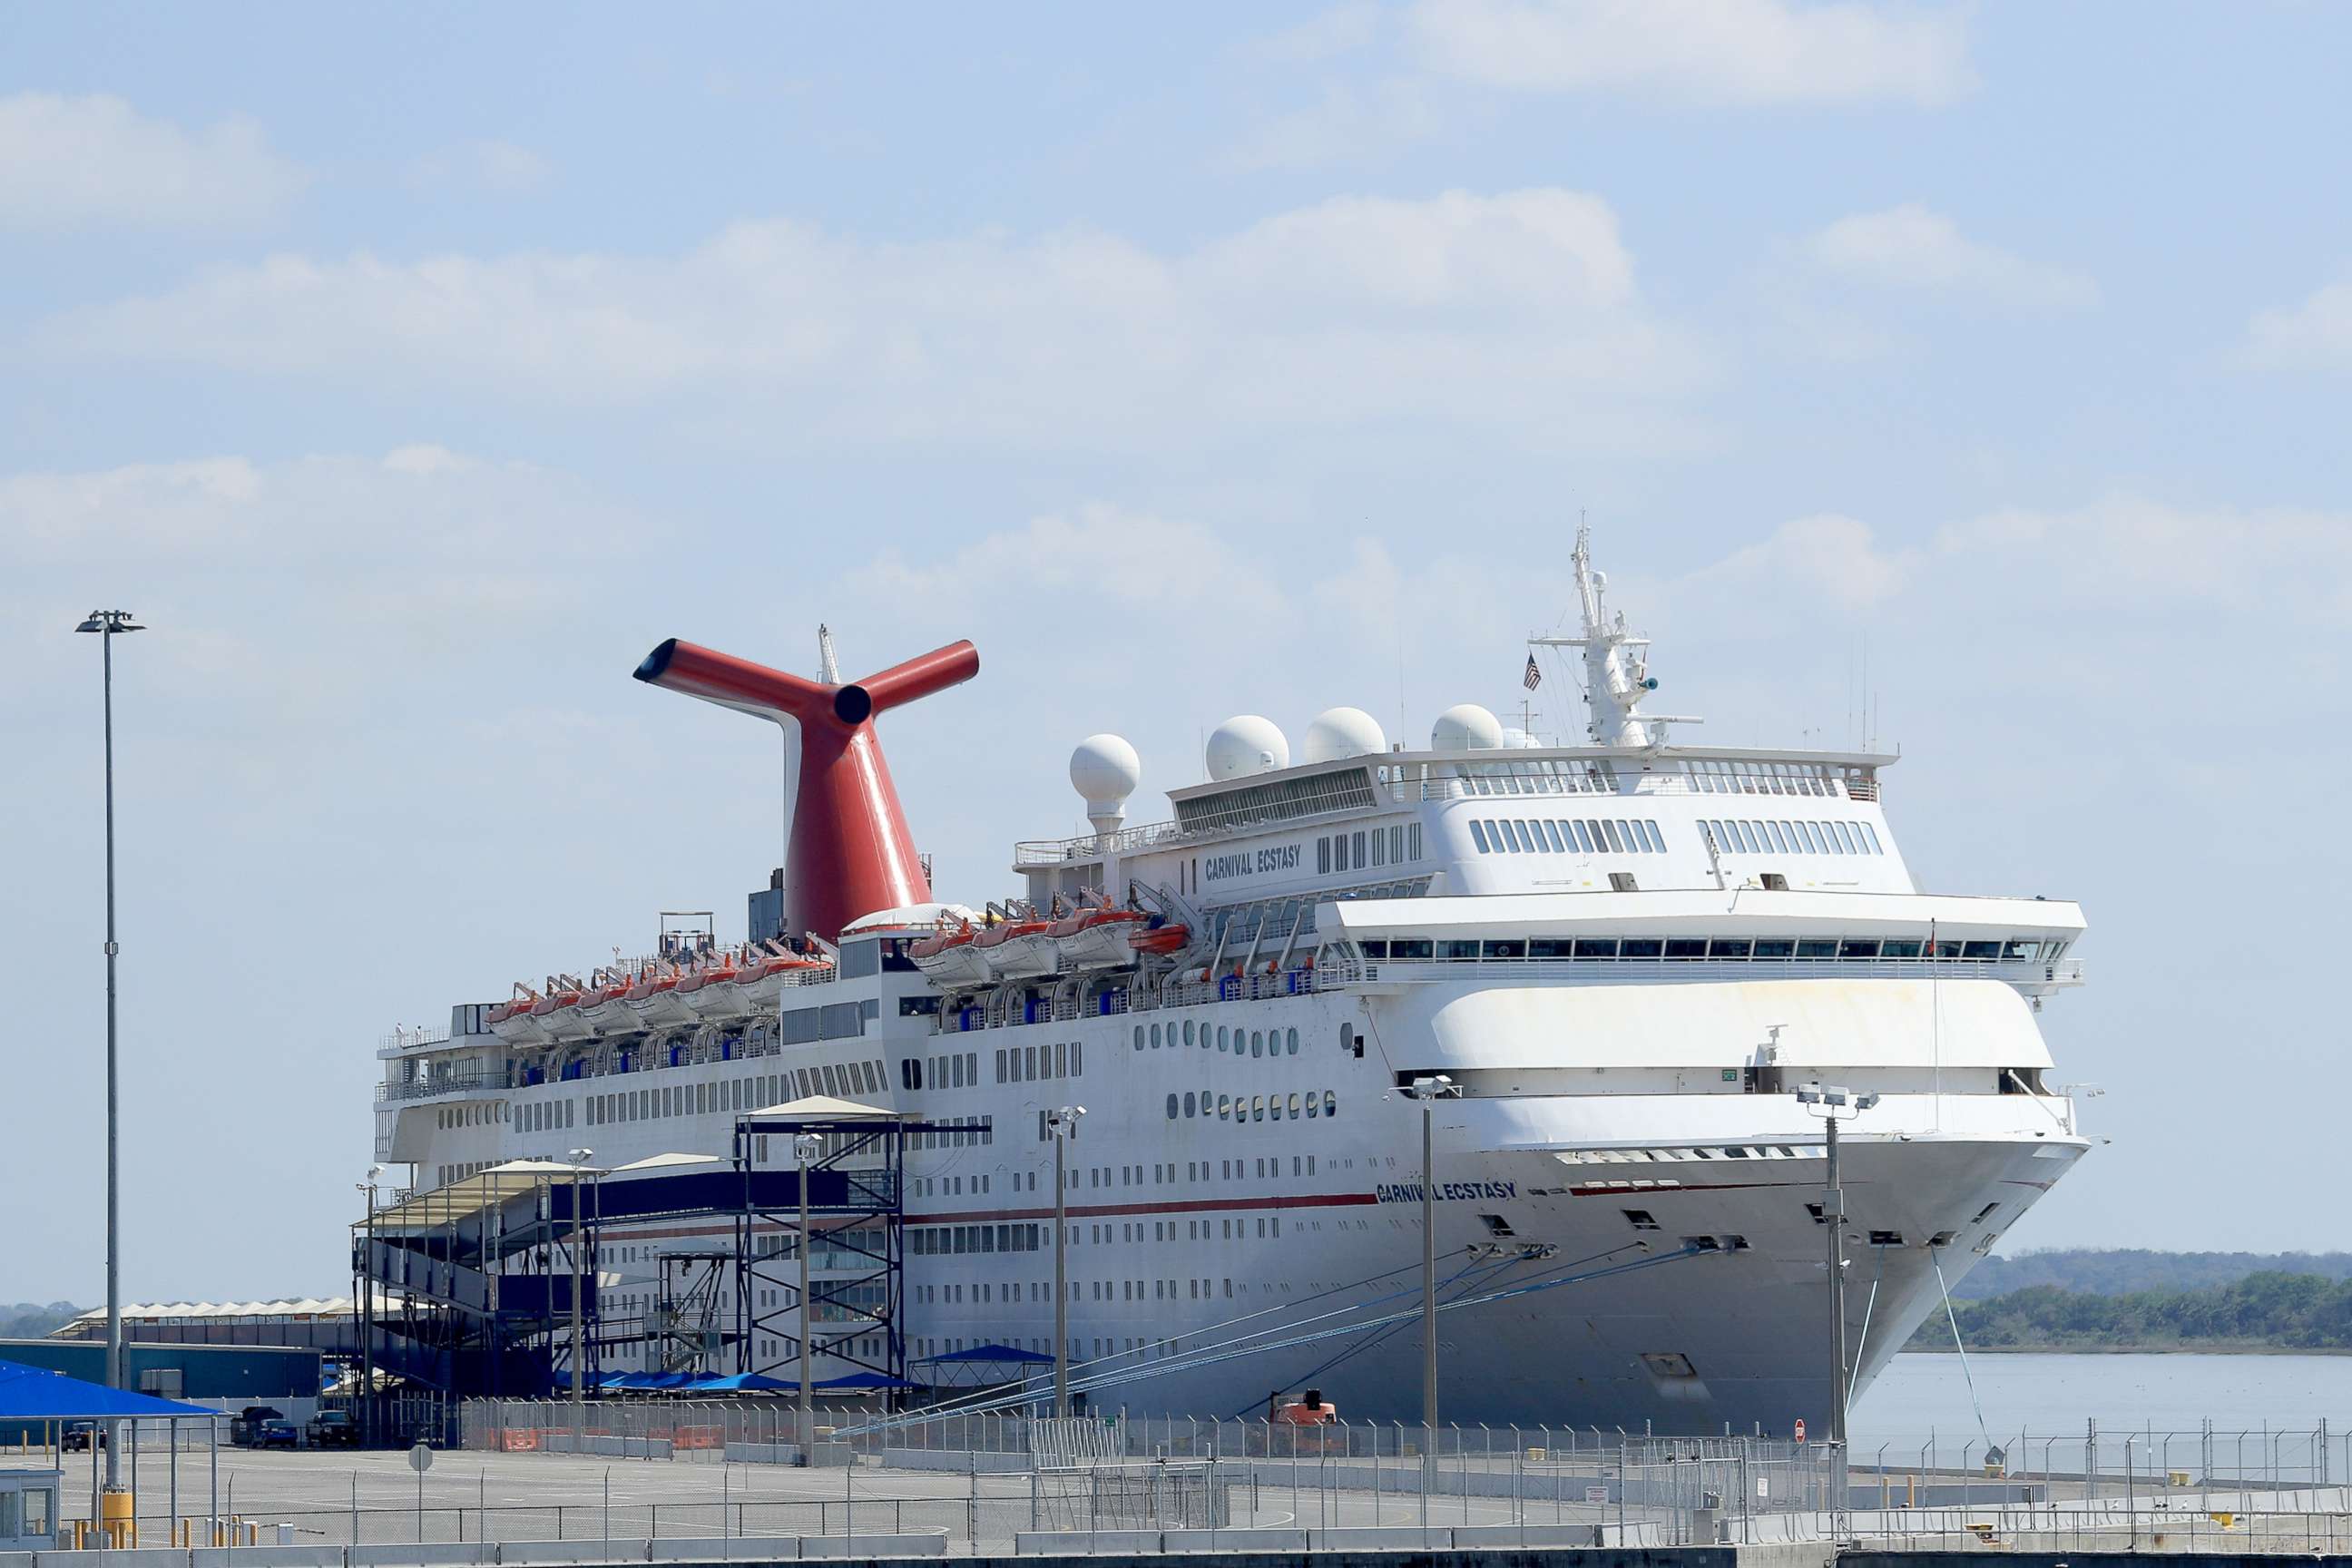 PHOTO: Carnival Cruise Line's Carnival Ecstacy cruise ship is docked at the Port of Jacksonville amid the Coronavirus outbreak on March 27, 2020 in Jacksonville, Florida.